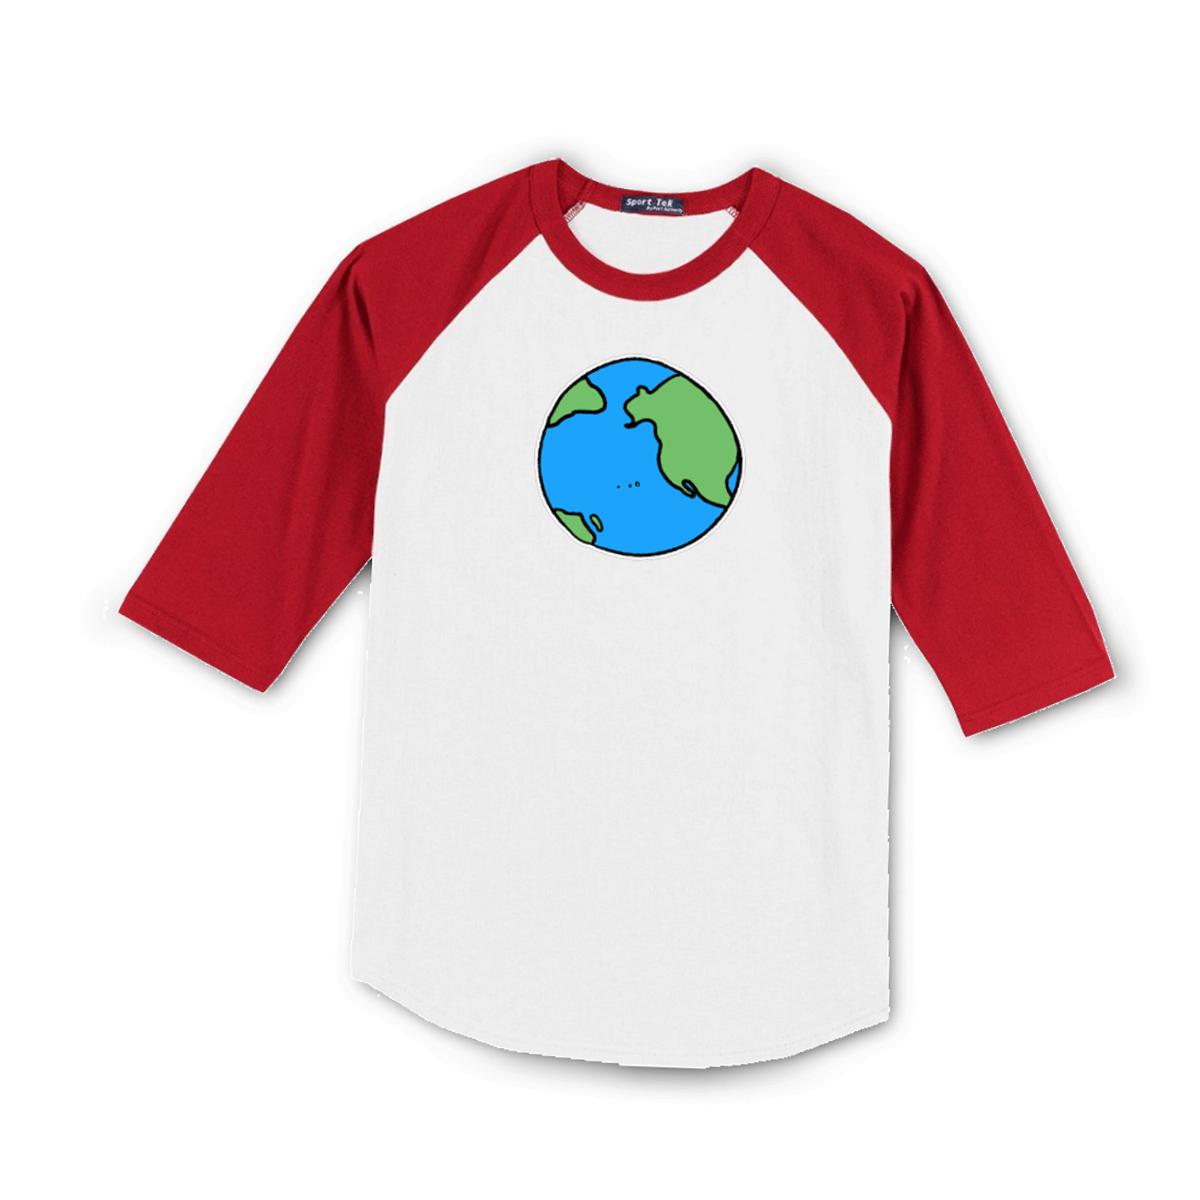 Earth Men's Raglan Tee Double Extra Large white-red